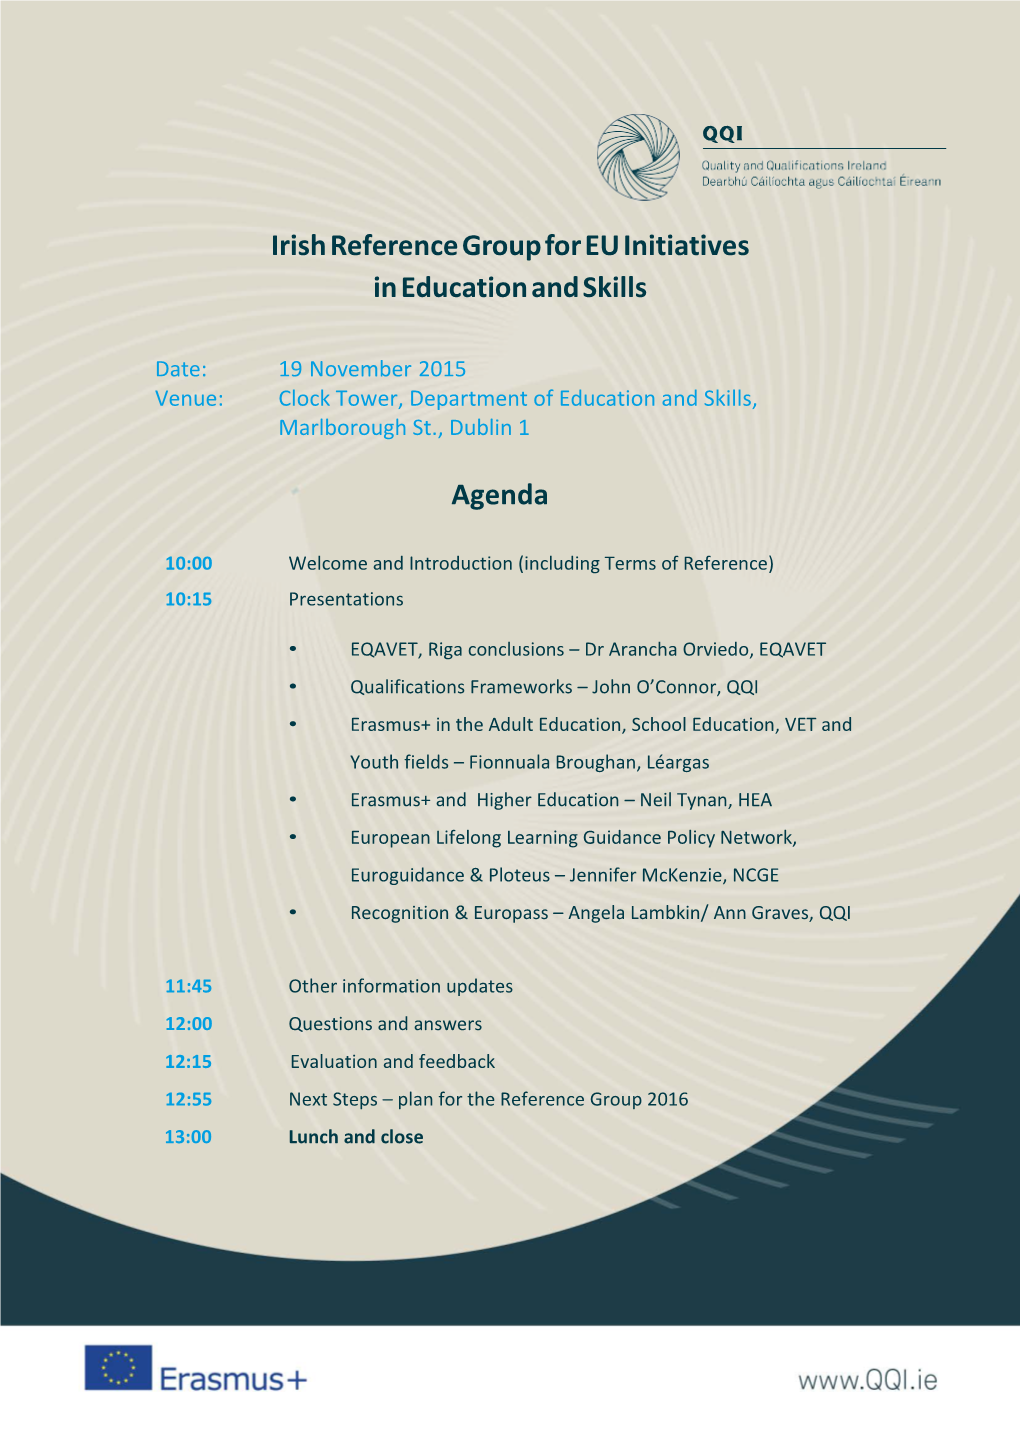 Irish Reference Group for EU Initiatives in Education and Skills